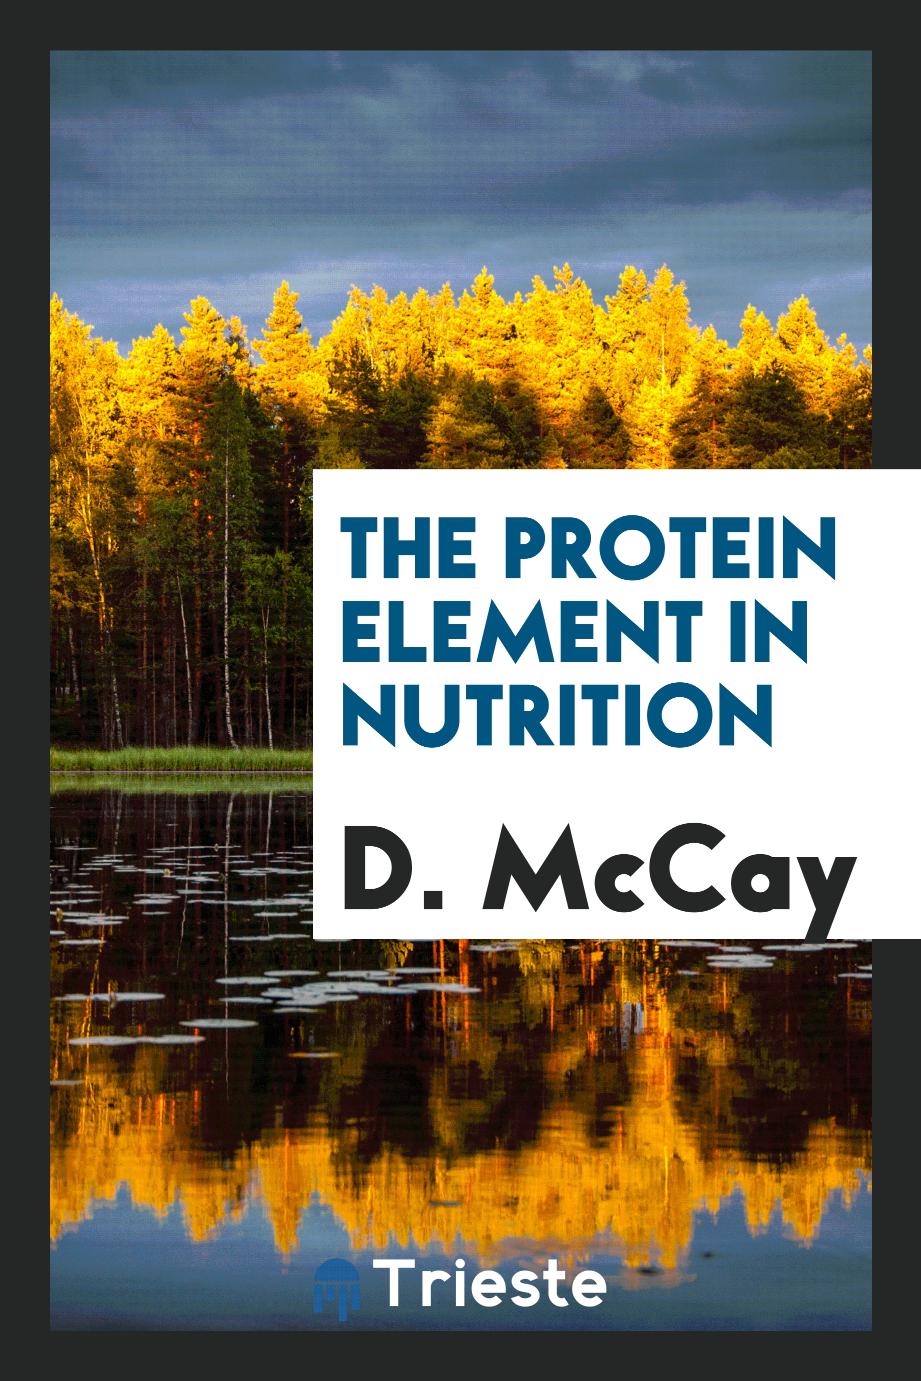 The protein element in nutrition